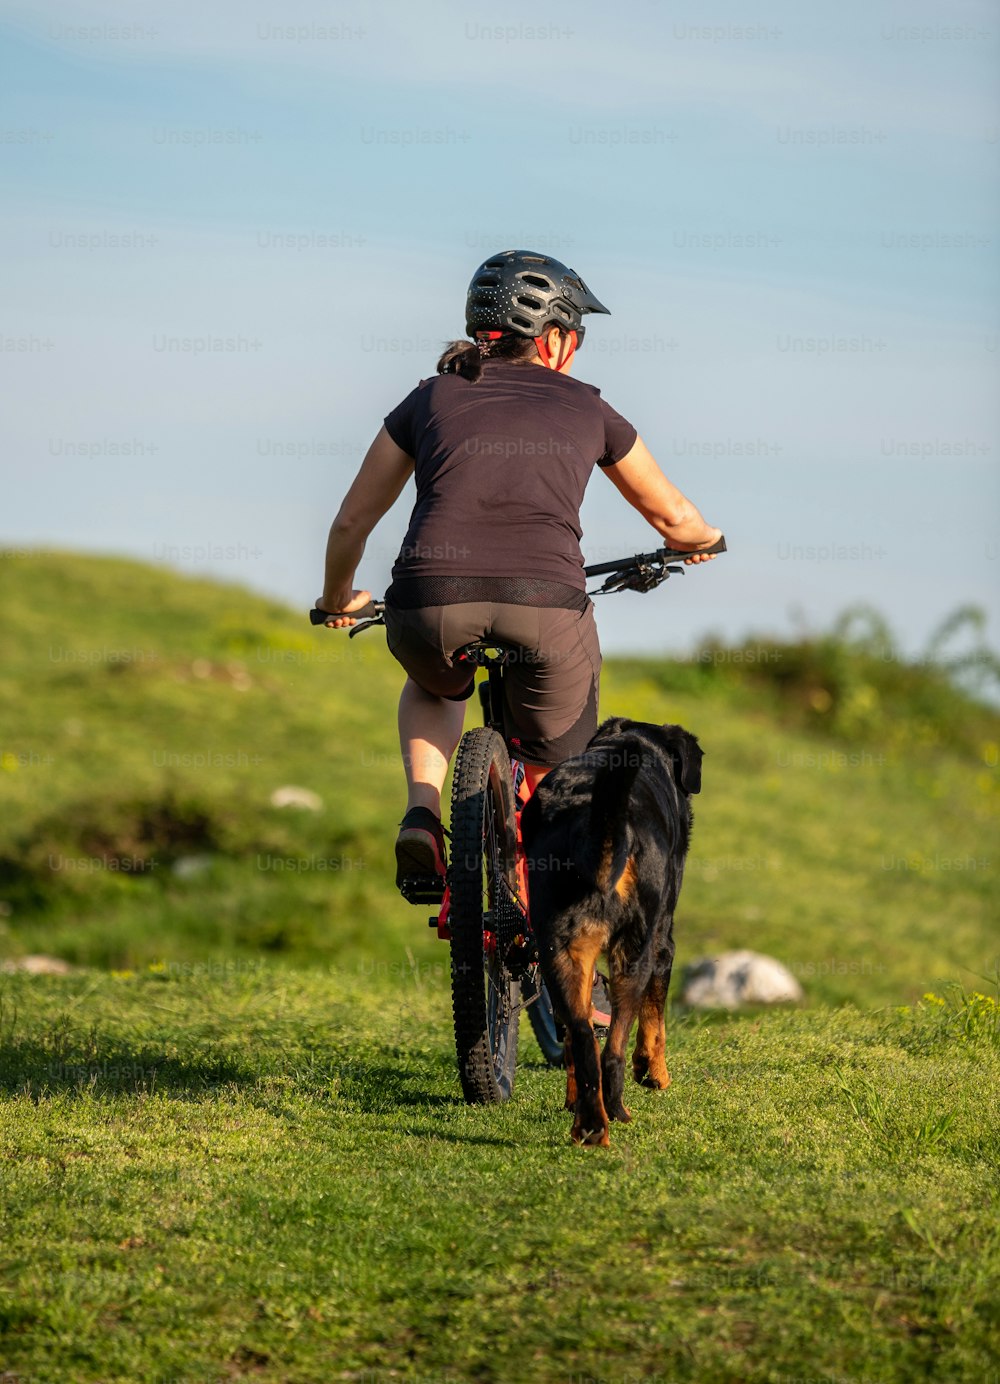 a person riding a bike with a dog on a leash